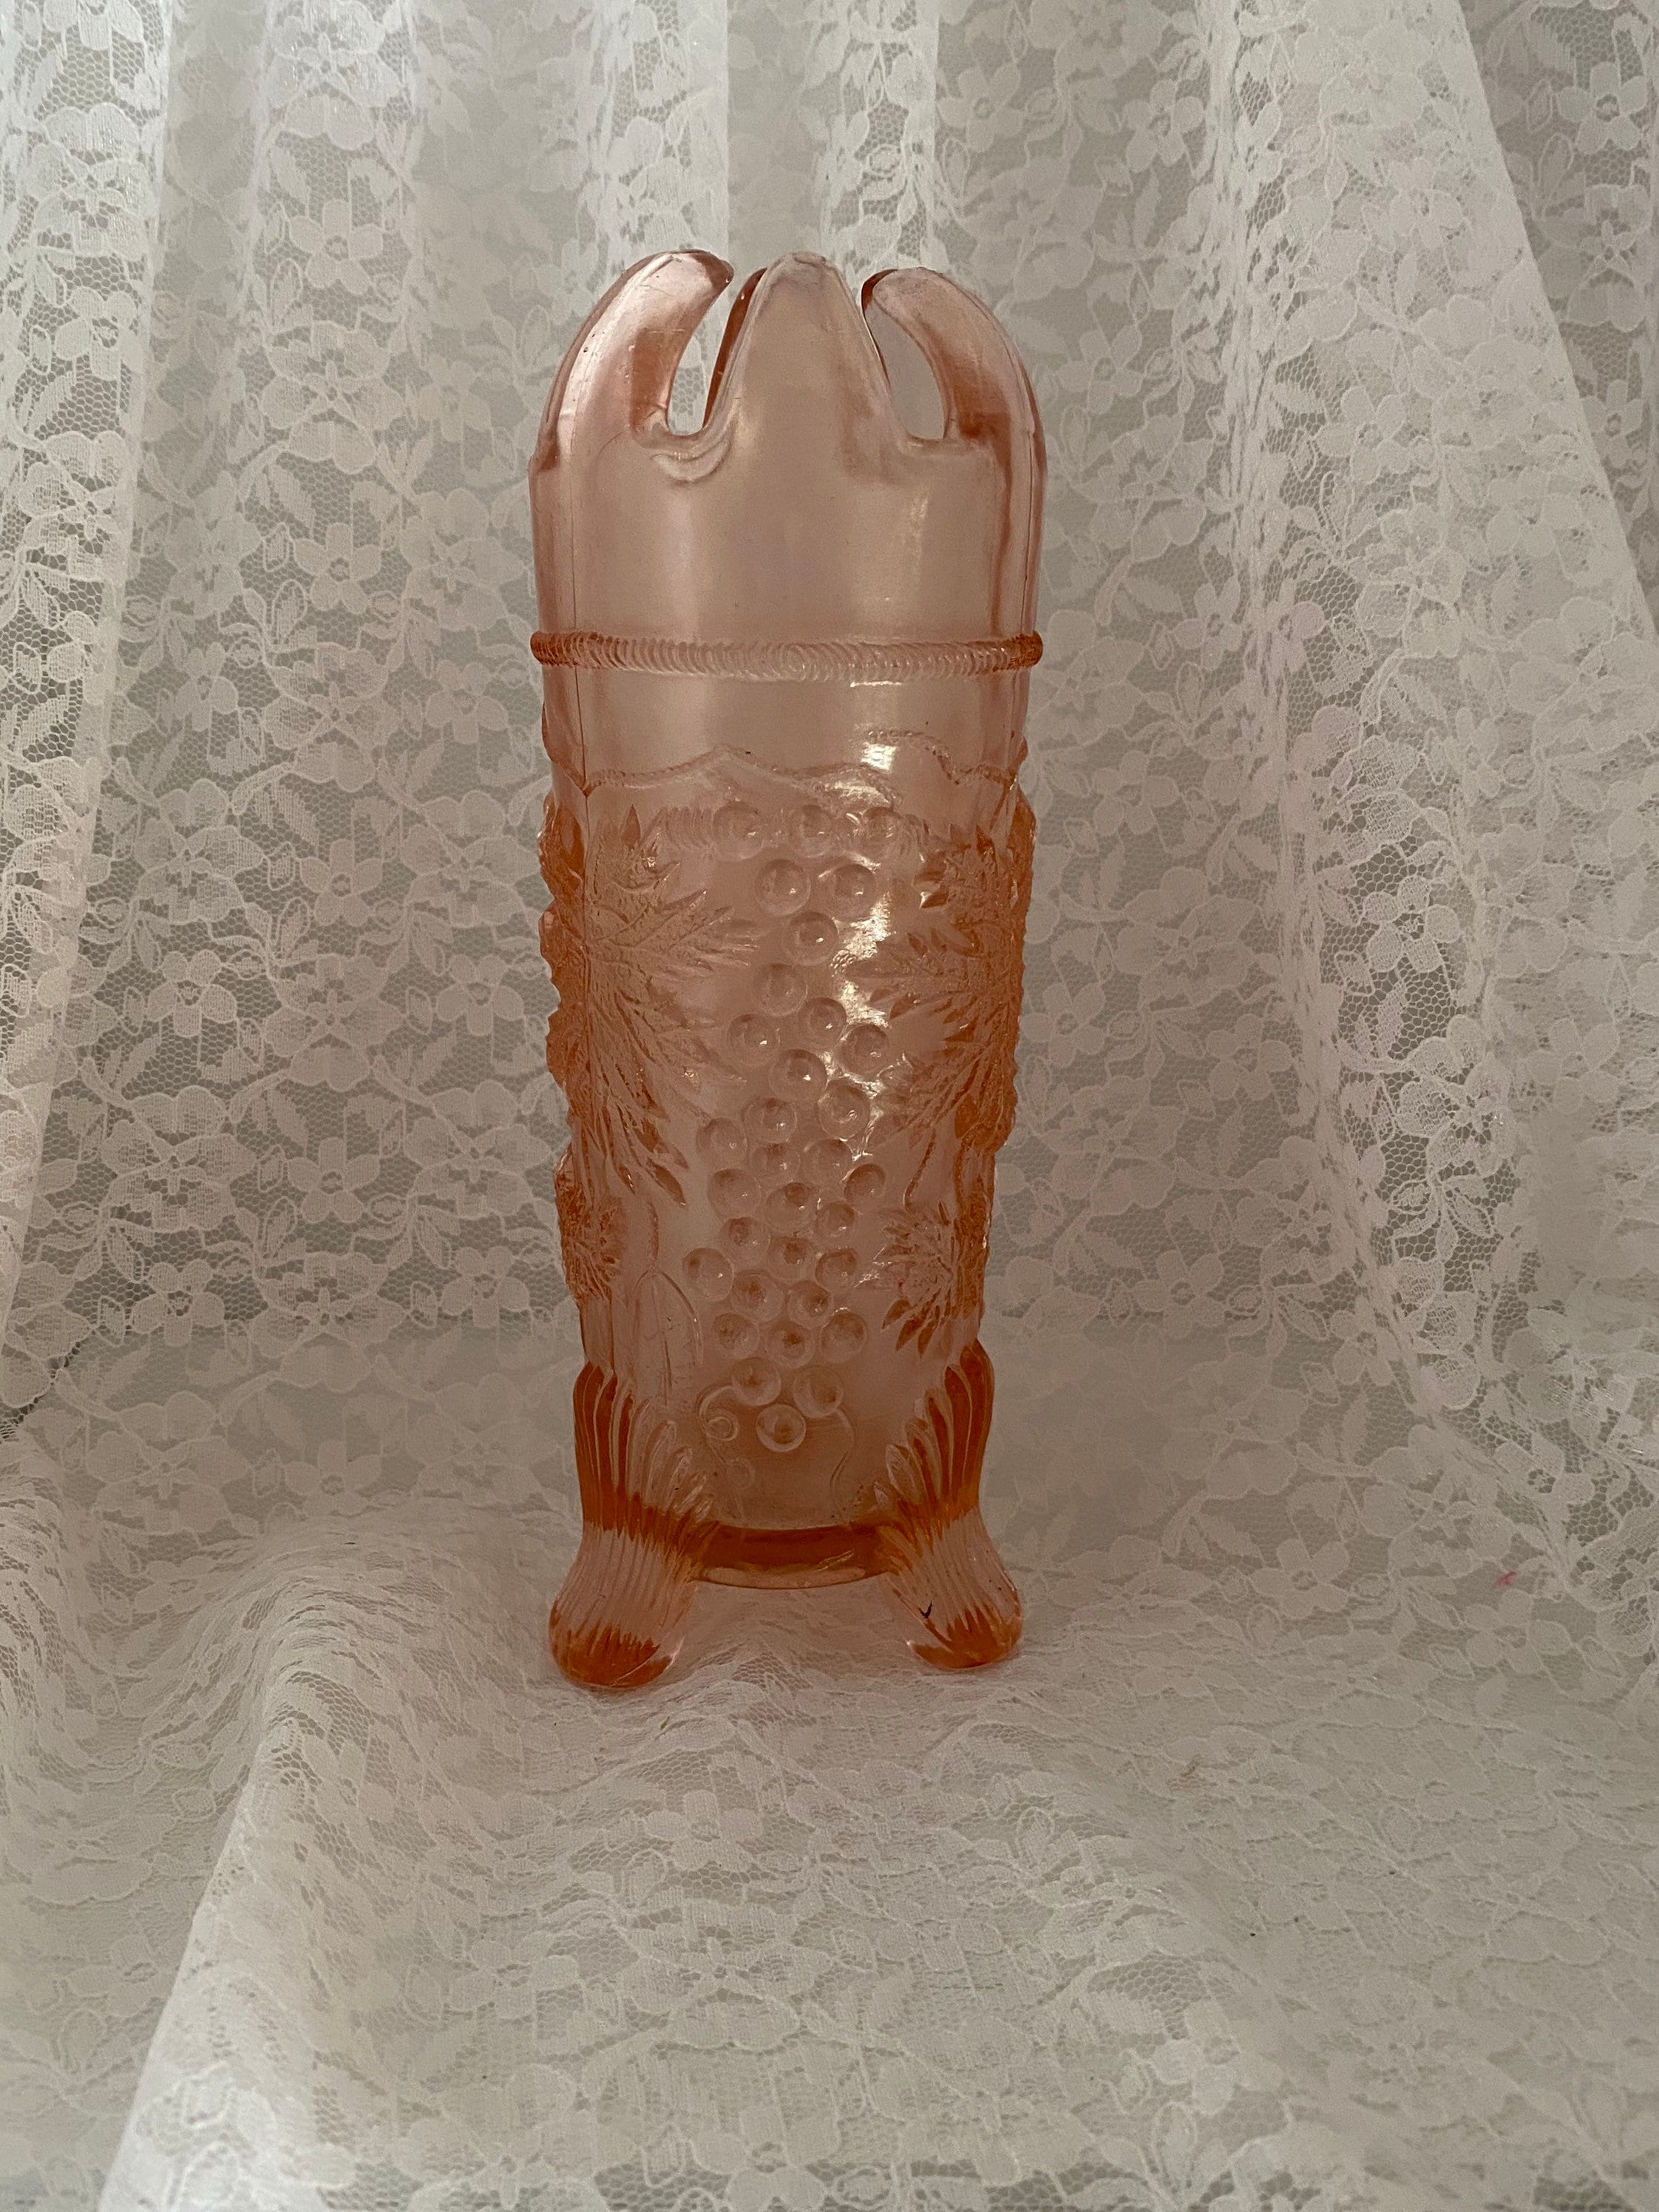 Vintage Pink Depression Glass Hat Pin Holder }{ Antique Reproduction }{ Victorian Dresser Hatpin and Jewelry Display Stand }{